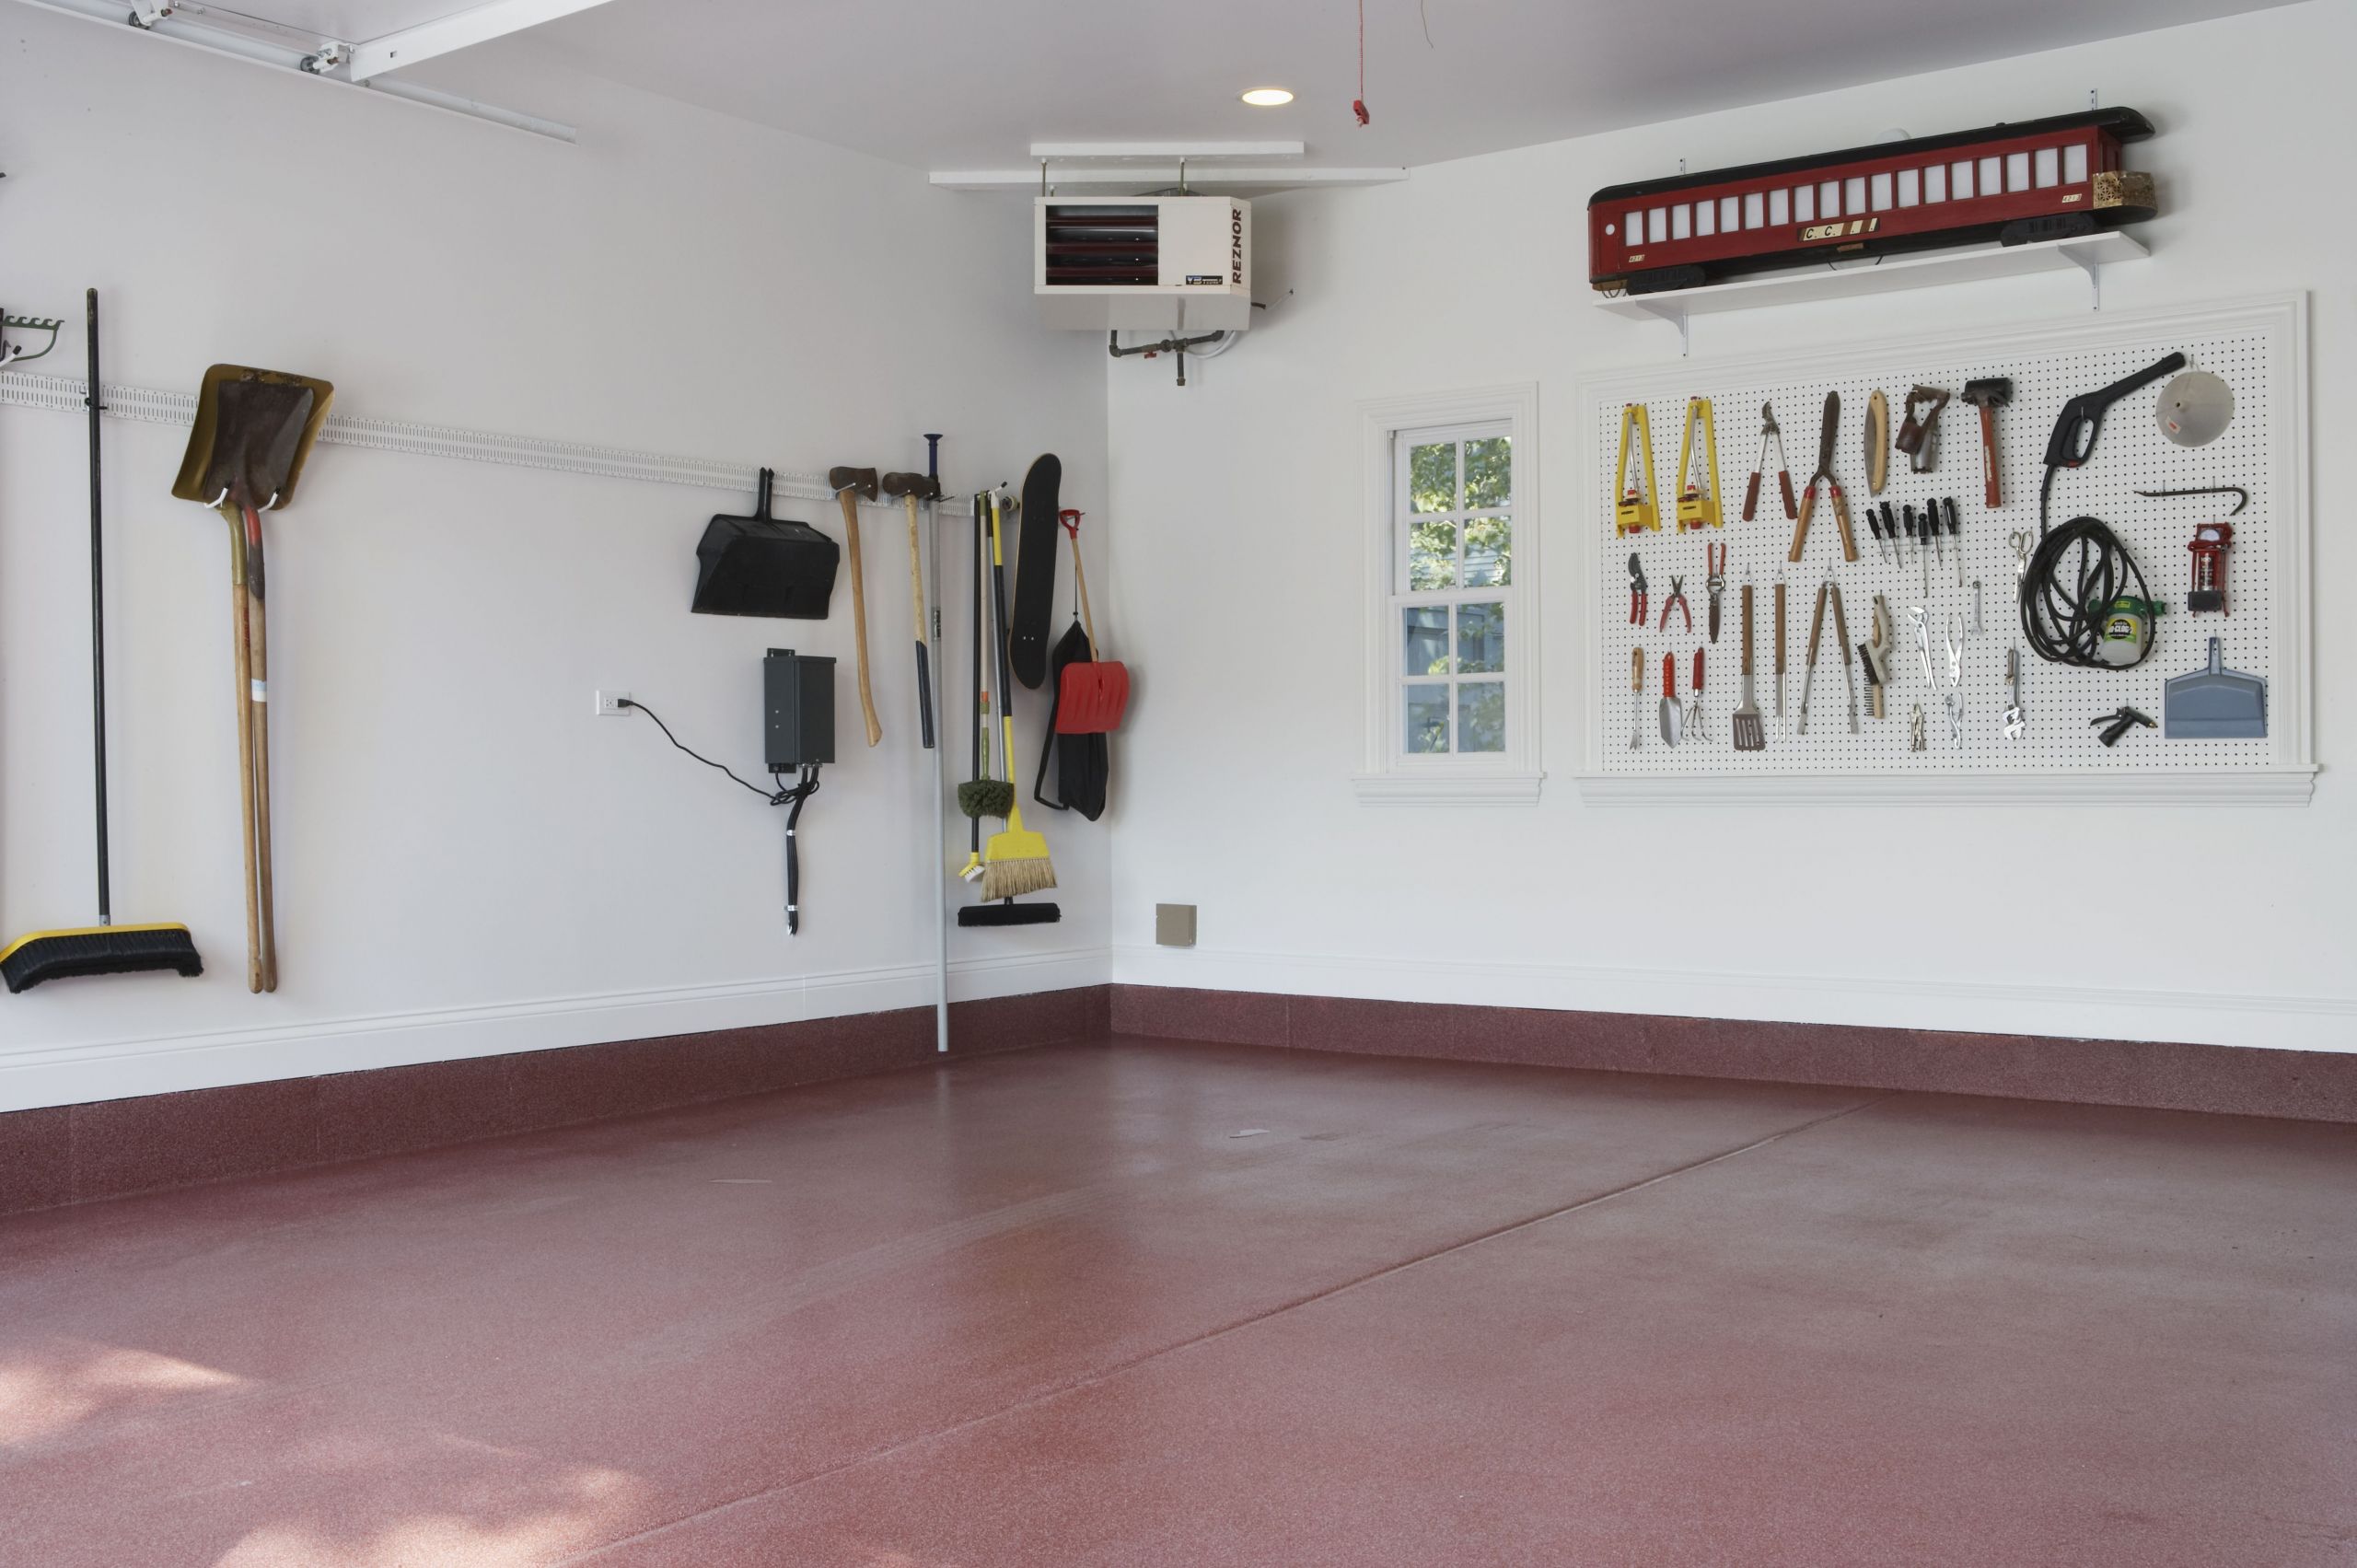 Garage Wall Organizer Systems
 Before You Buy a Garage Wall System